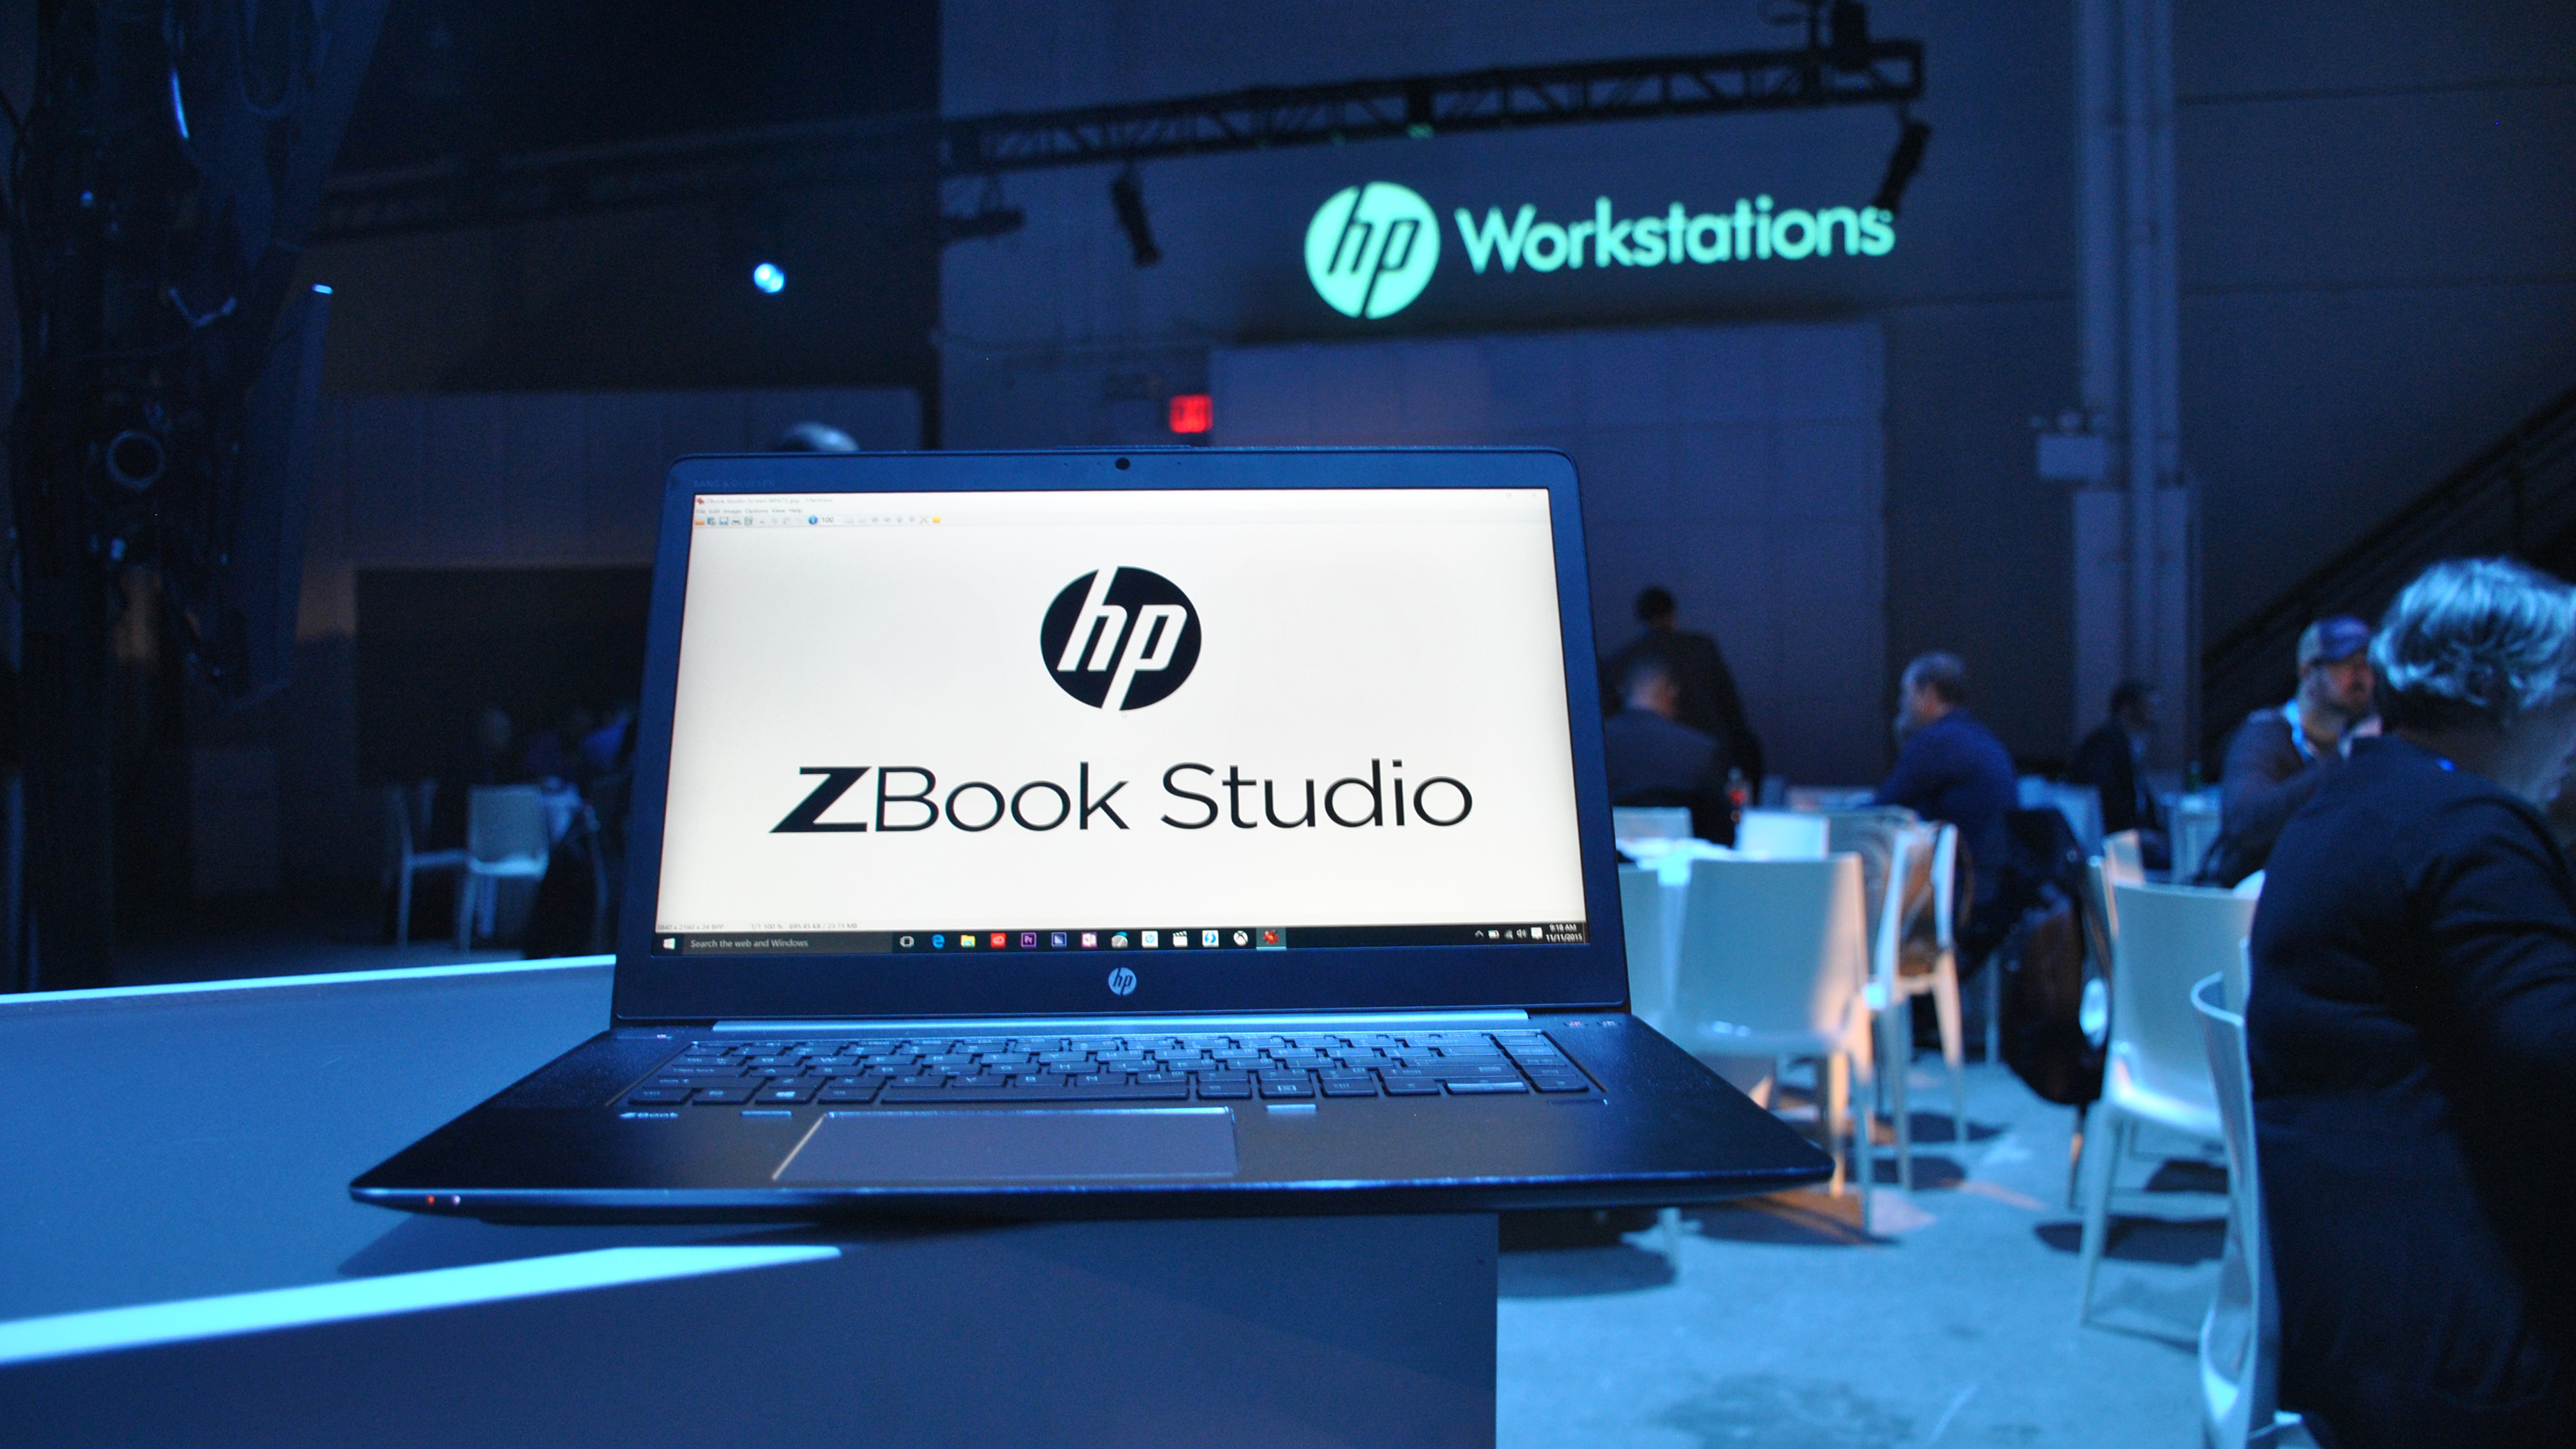 Specifications and performance - HP ZBook Studio G3 review - Page 2 | TechRadar